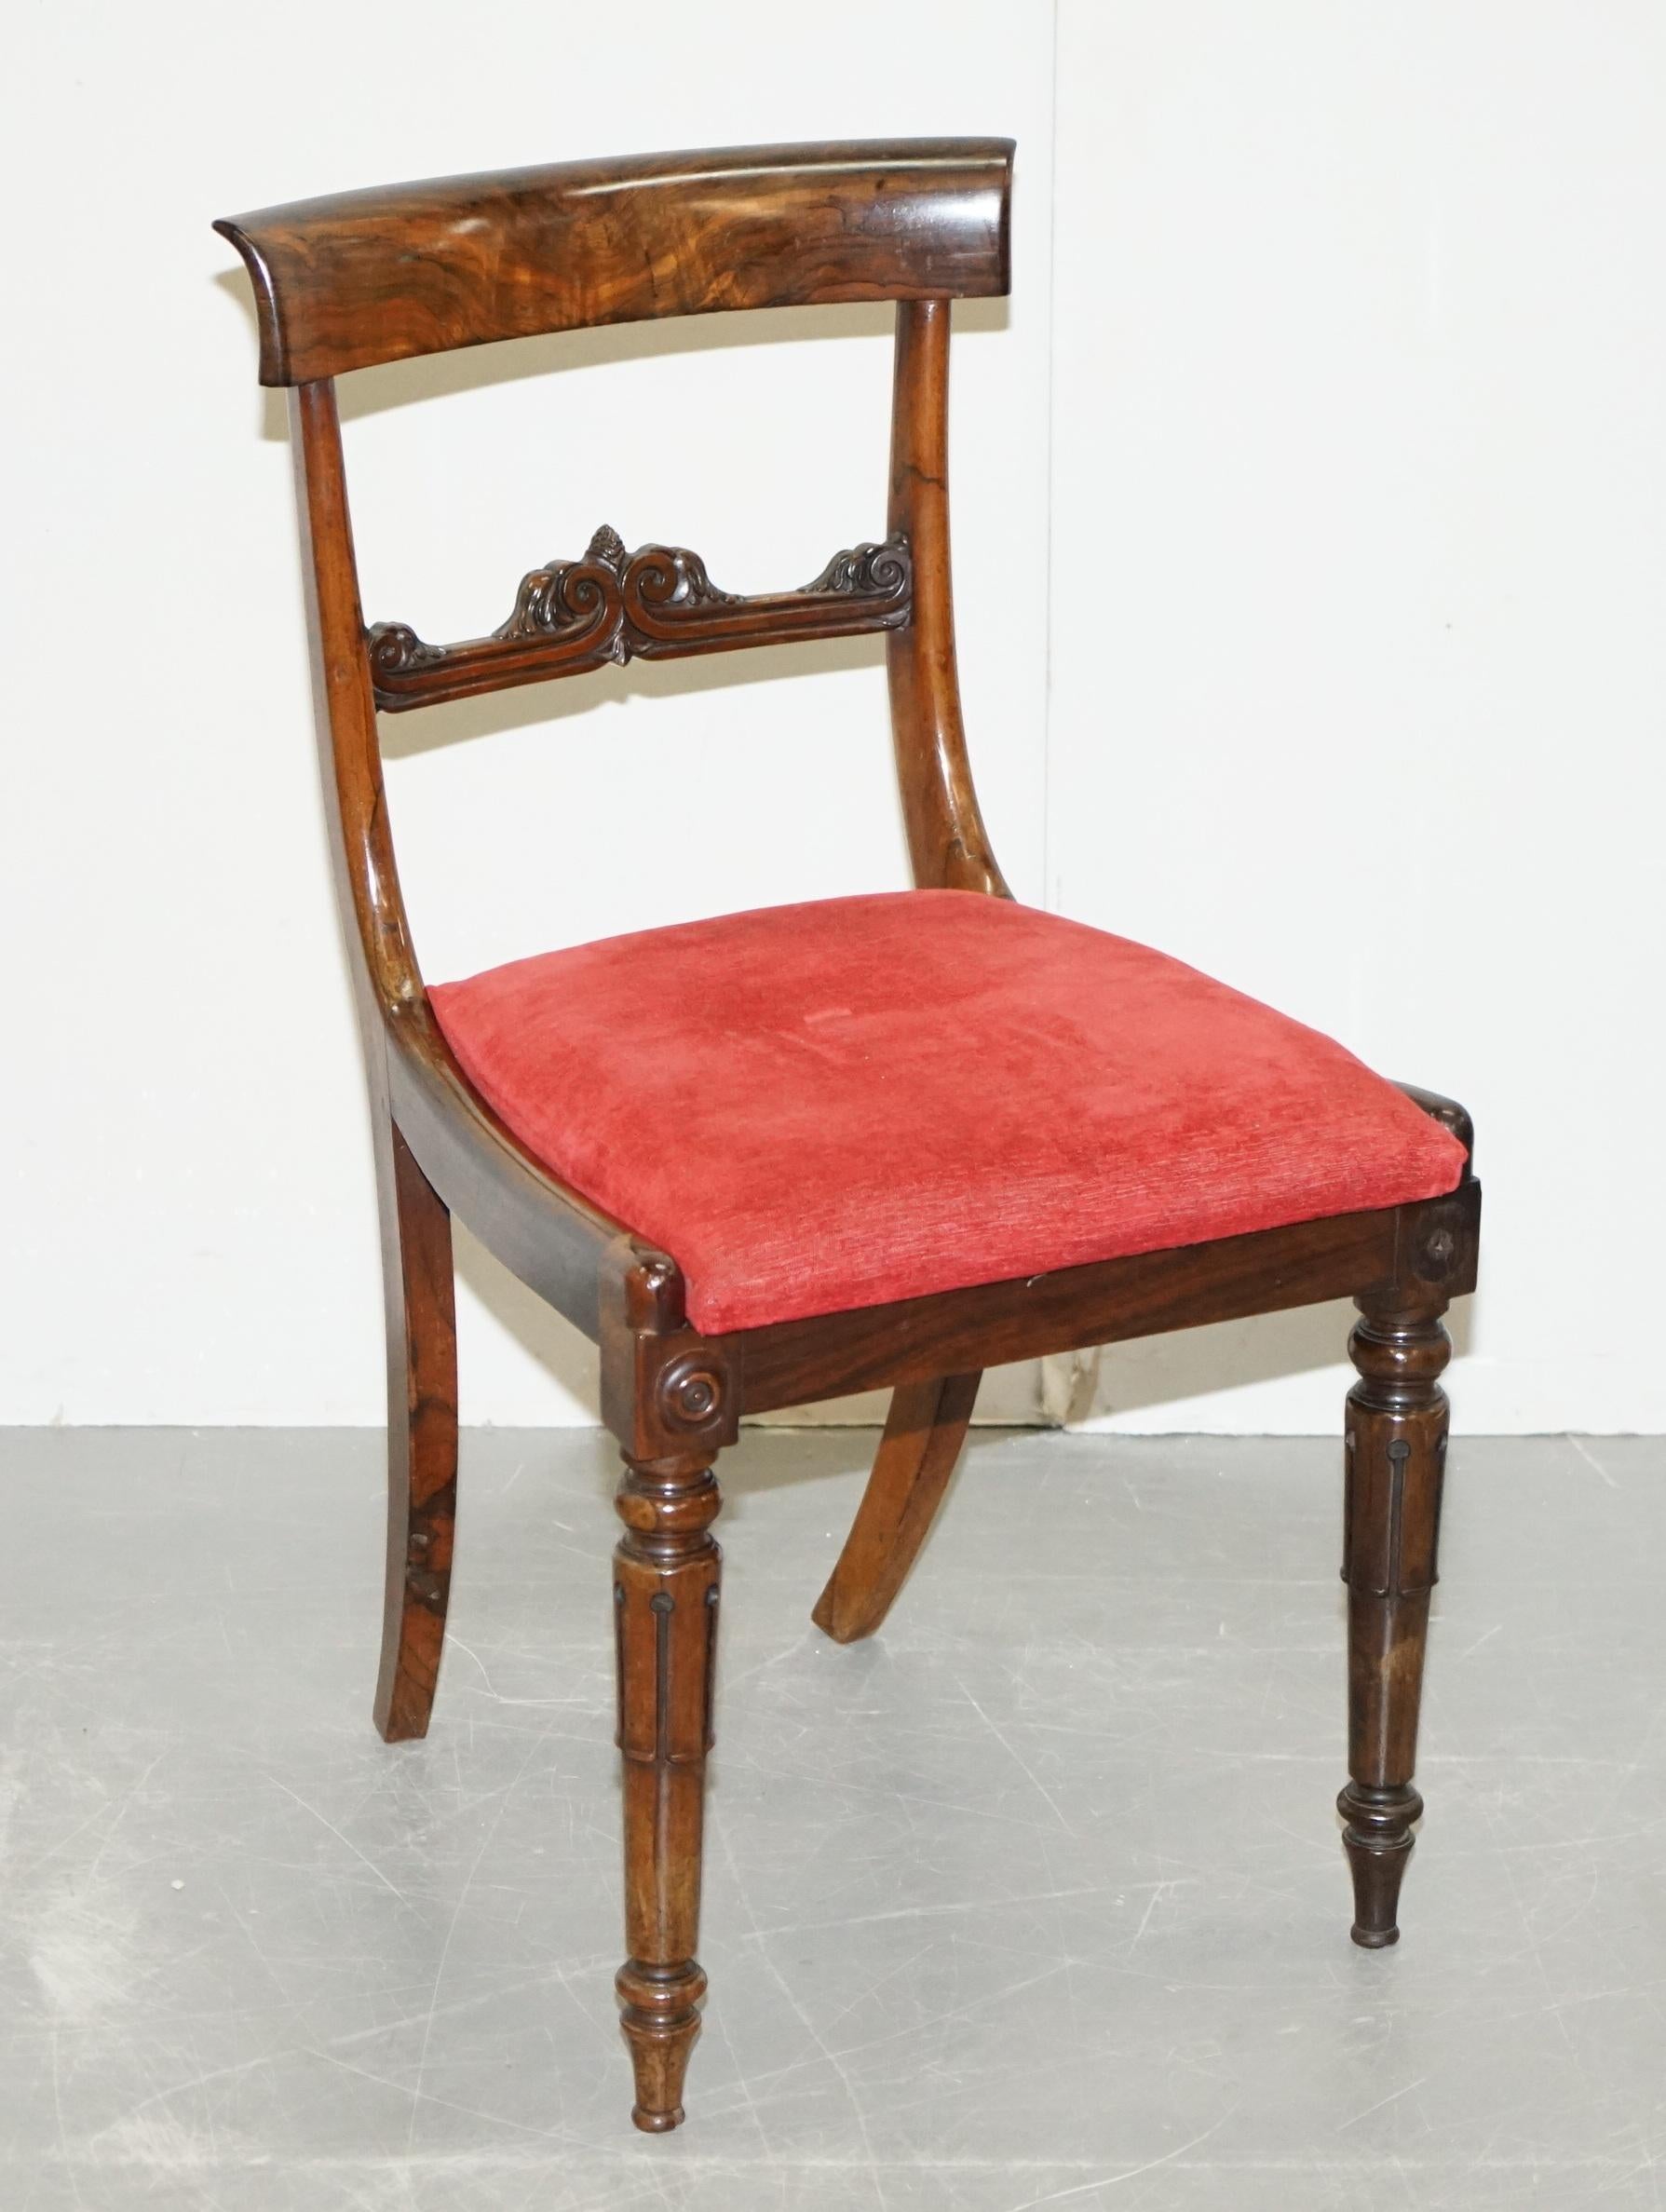 We are delighted to offer for sale this exquisite set of five original William IV circa 1830 hardwood dining chairs

These chairs have a timber patina to die for! The hardwood has such a glorious grain, these are pure art furniture from every